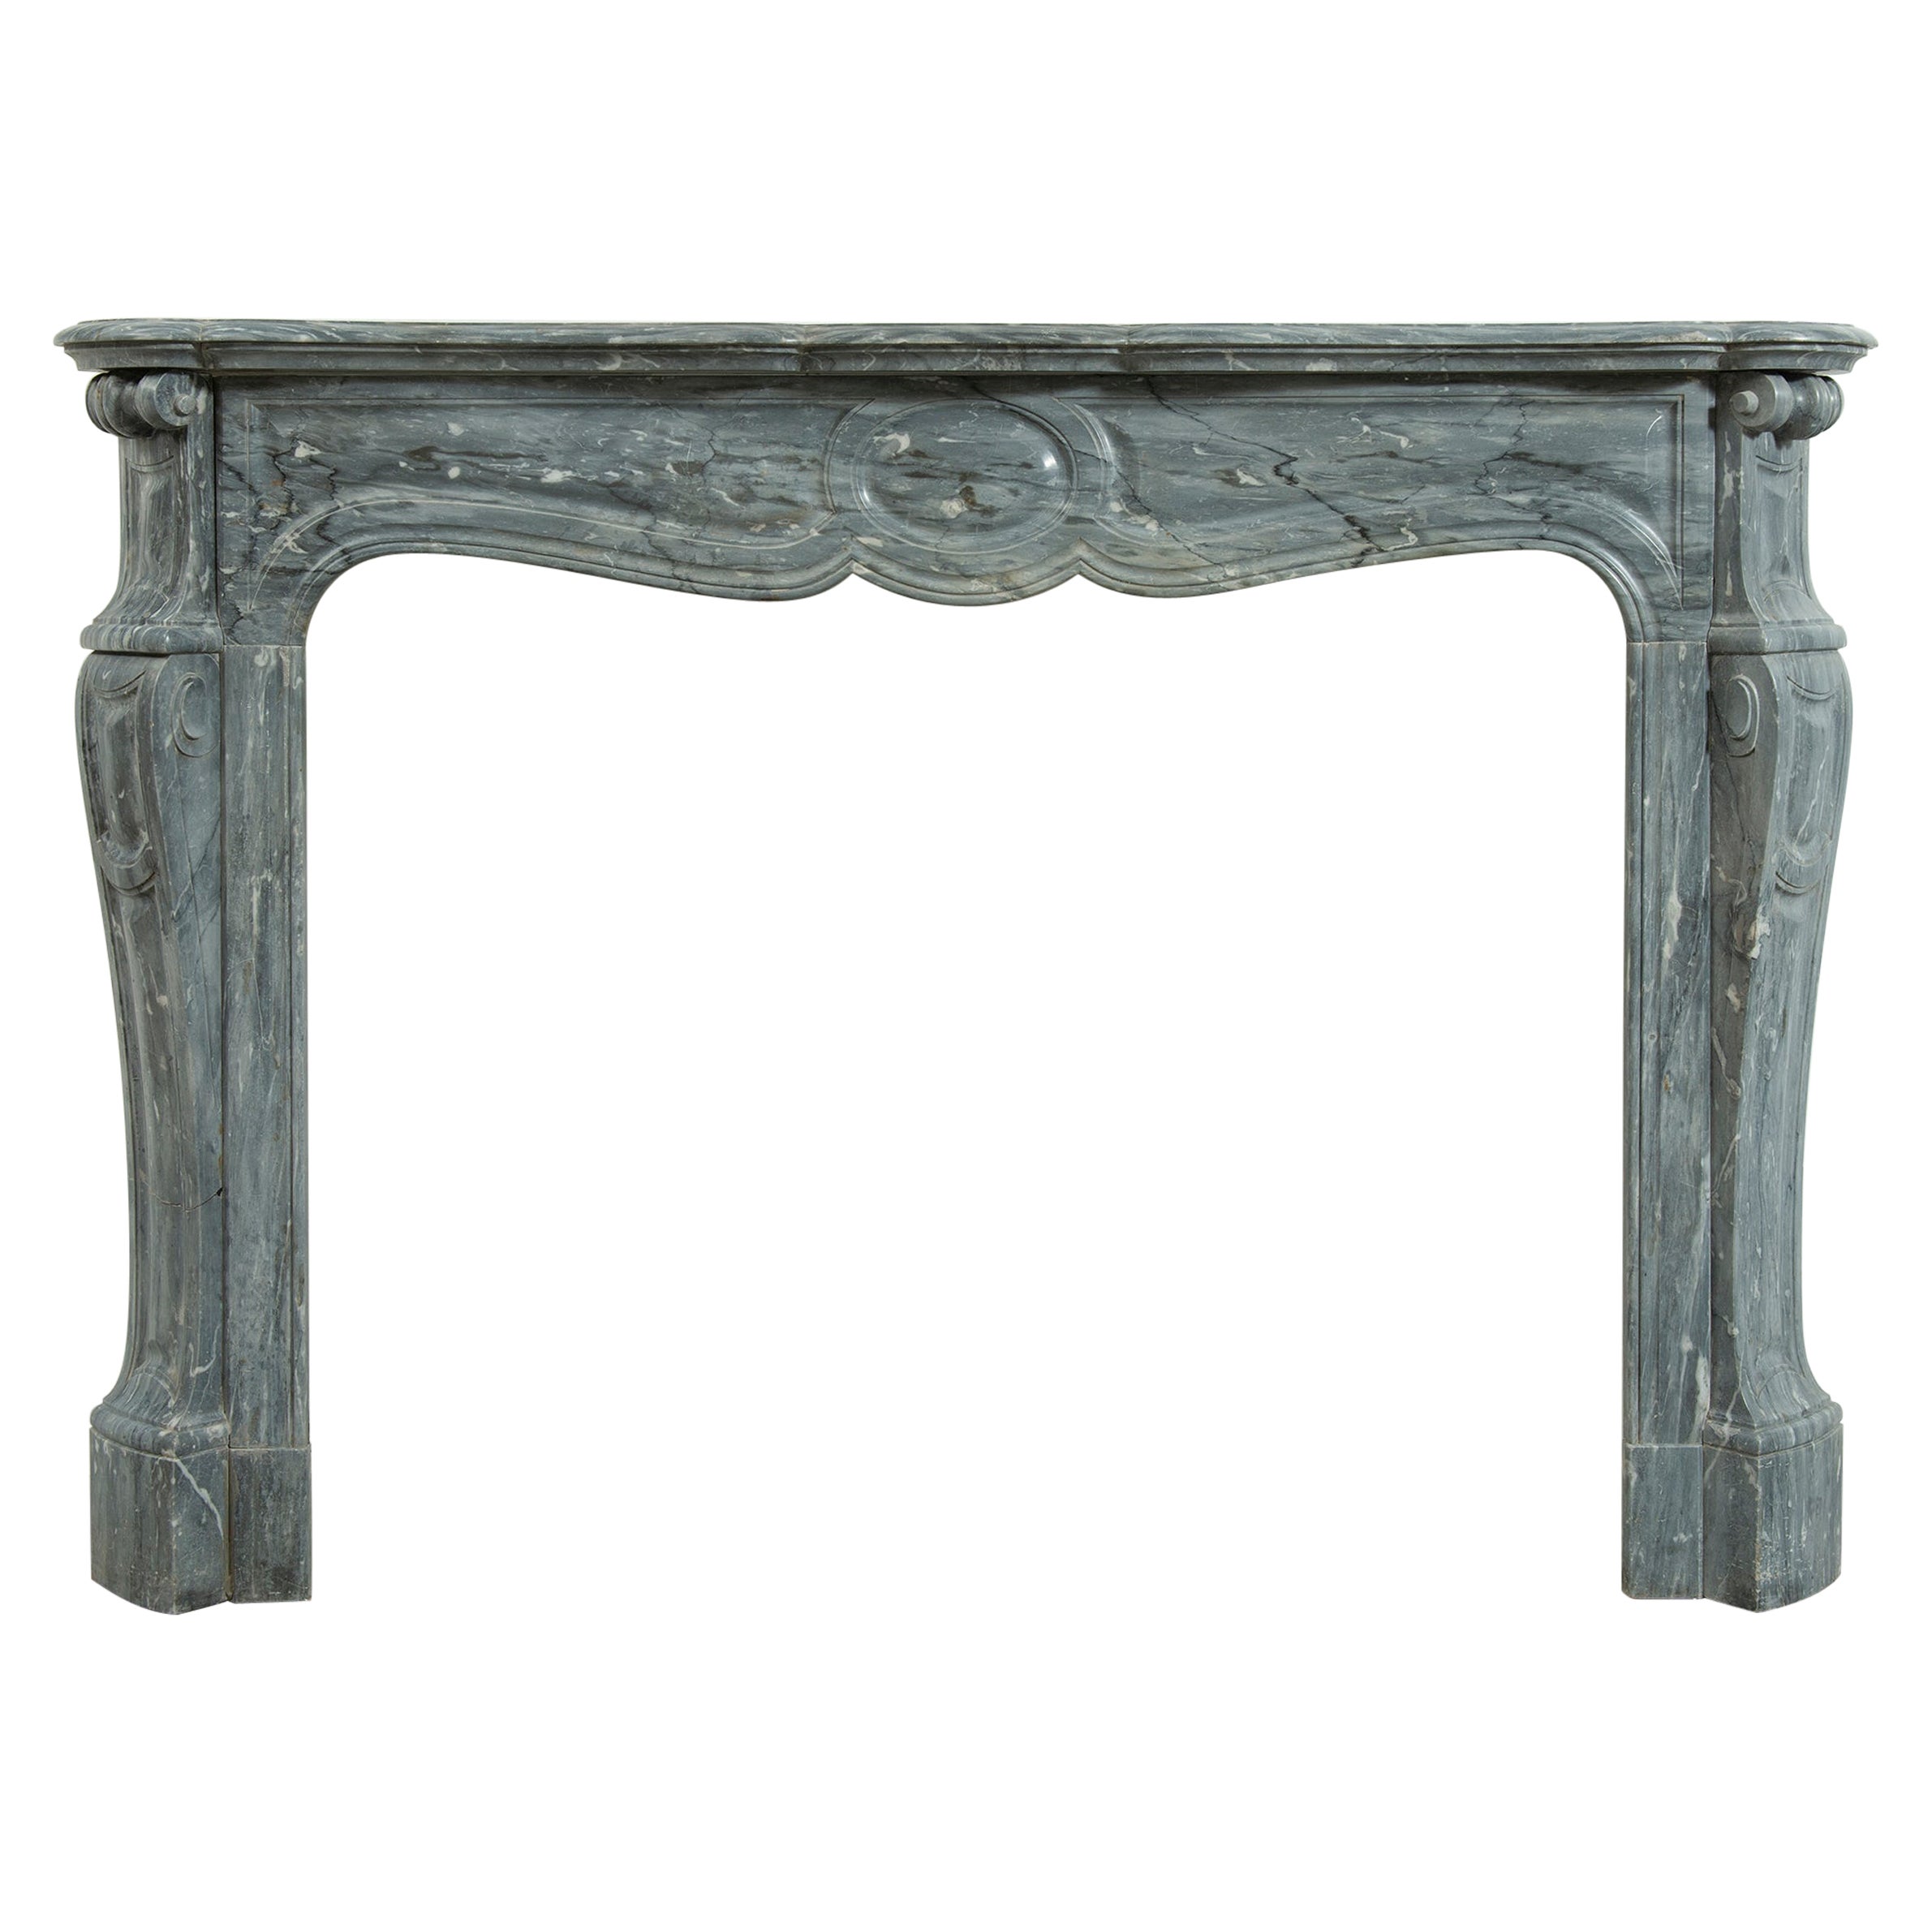 Antique Grey Marble Fireplace For Sale